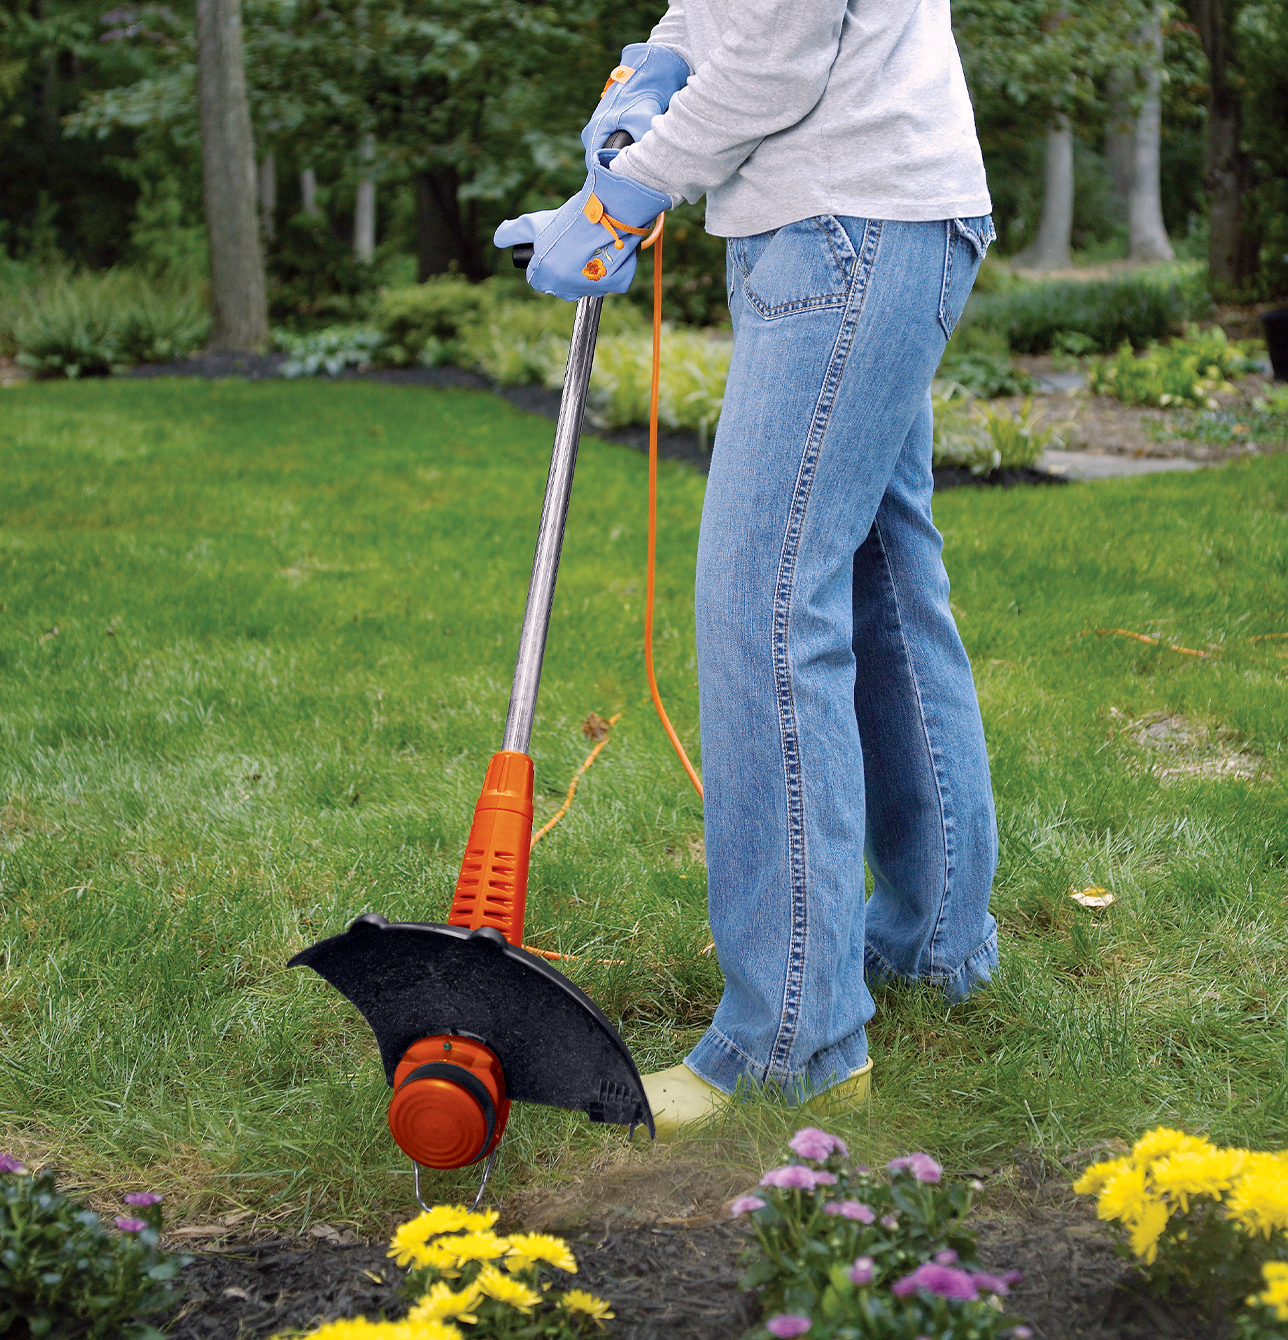 Black & Decker ST7700/ST7000 Automatic String Trimmer 13 Inch: Electric  String Trimmer (028877592046-1)